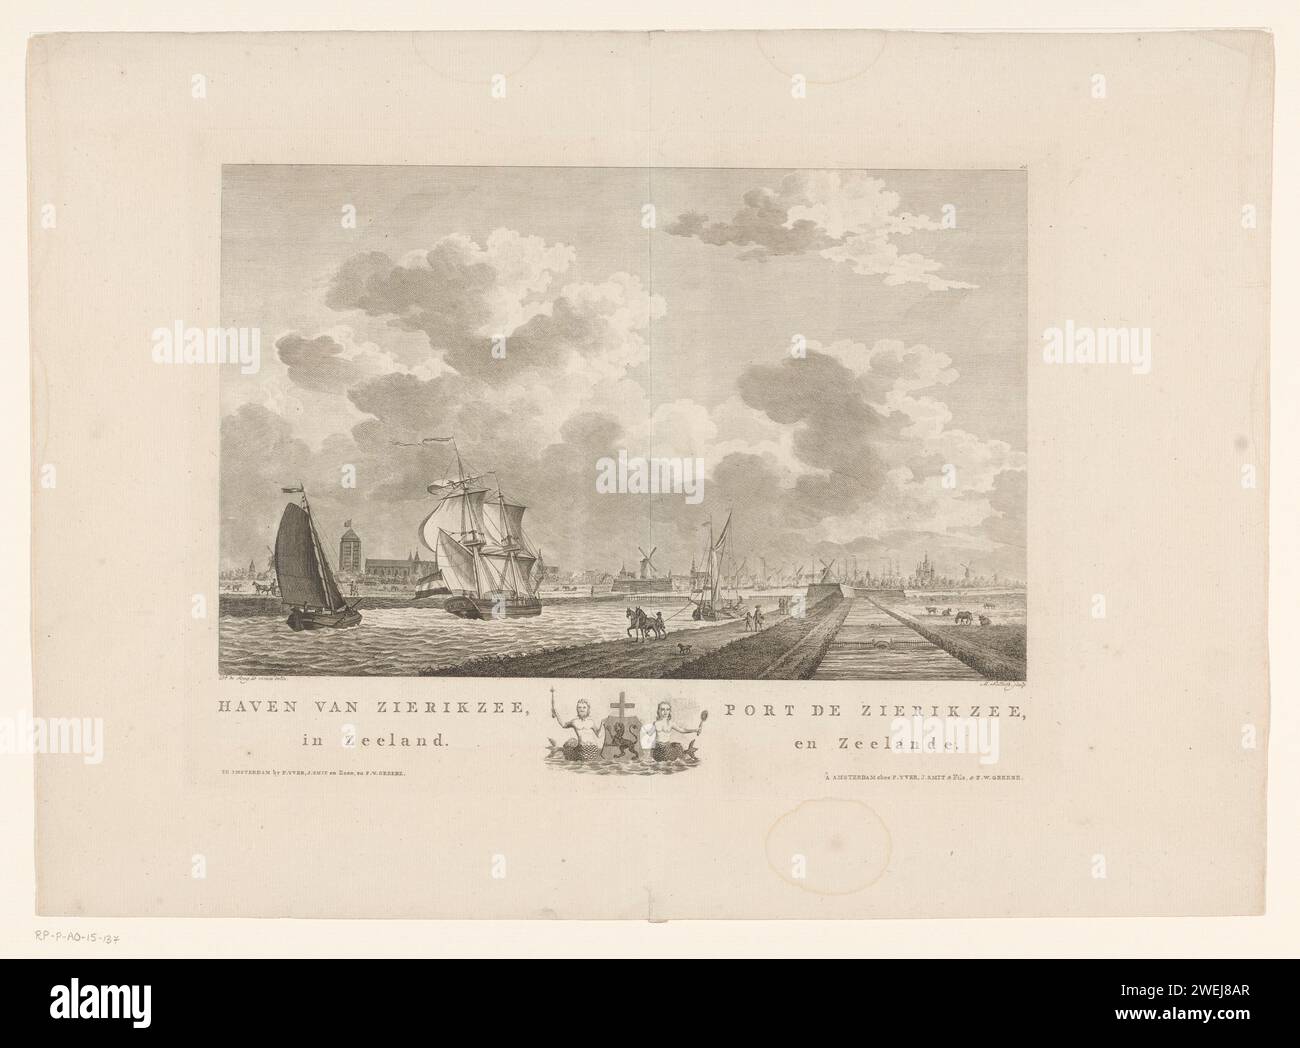 View of the port of Zierikzee, Mathias de Sallieth, after Dirk de Jong, 1779 - 1787 print View of the port of Zierikzee with different boats. Left in the background the Sint-Lievensmonsterkerk. In the margin the title in Dutch and French with the coat of arms of the city in the middle. Numbered at the top right: 20.  paper etching / engraving harbour. coat of arms (as symbol of the state, etc.) (+ city; municipal). sailing-ship, sailing-boat. church (exterior) Zierikzee. Sint-Lievensmonsterkerk Stock Photo